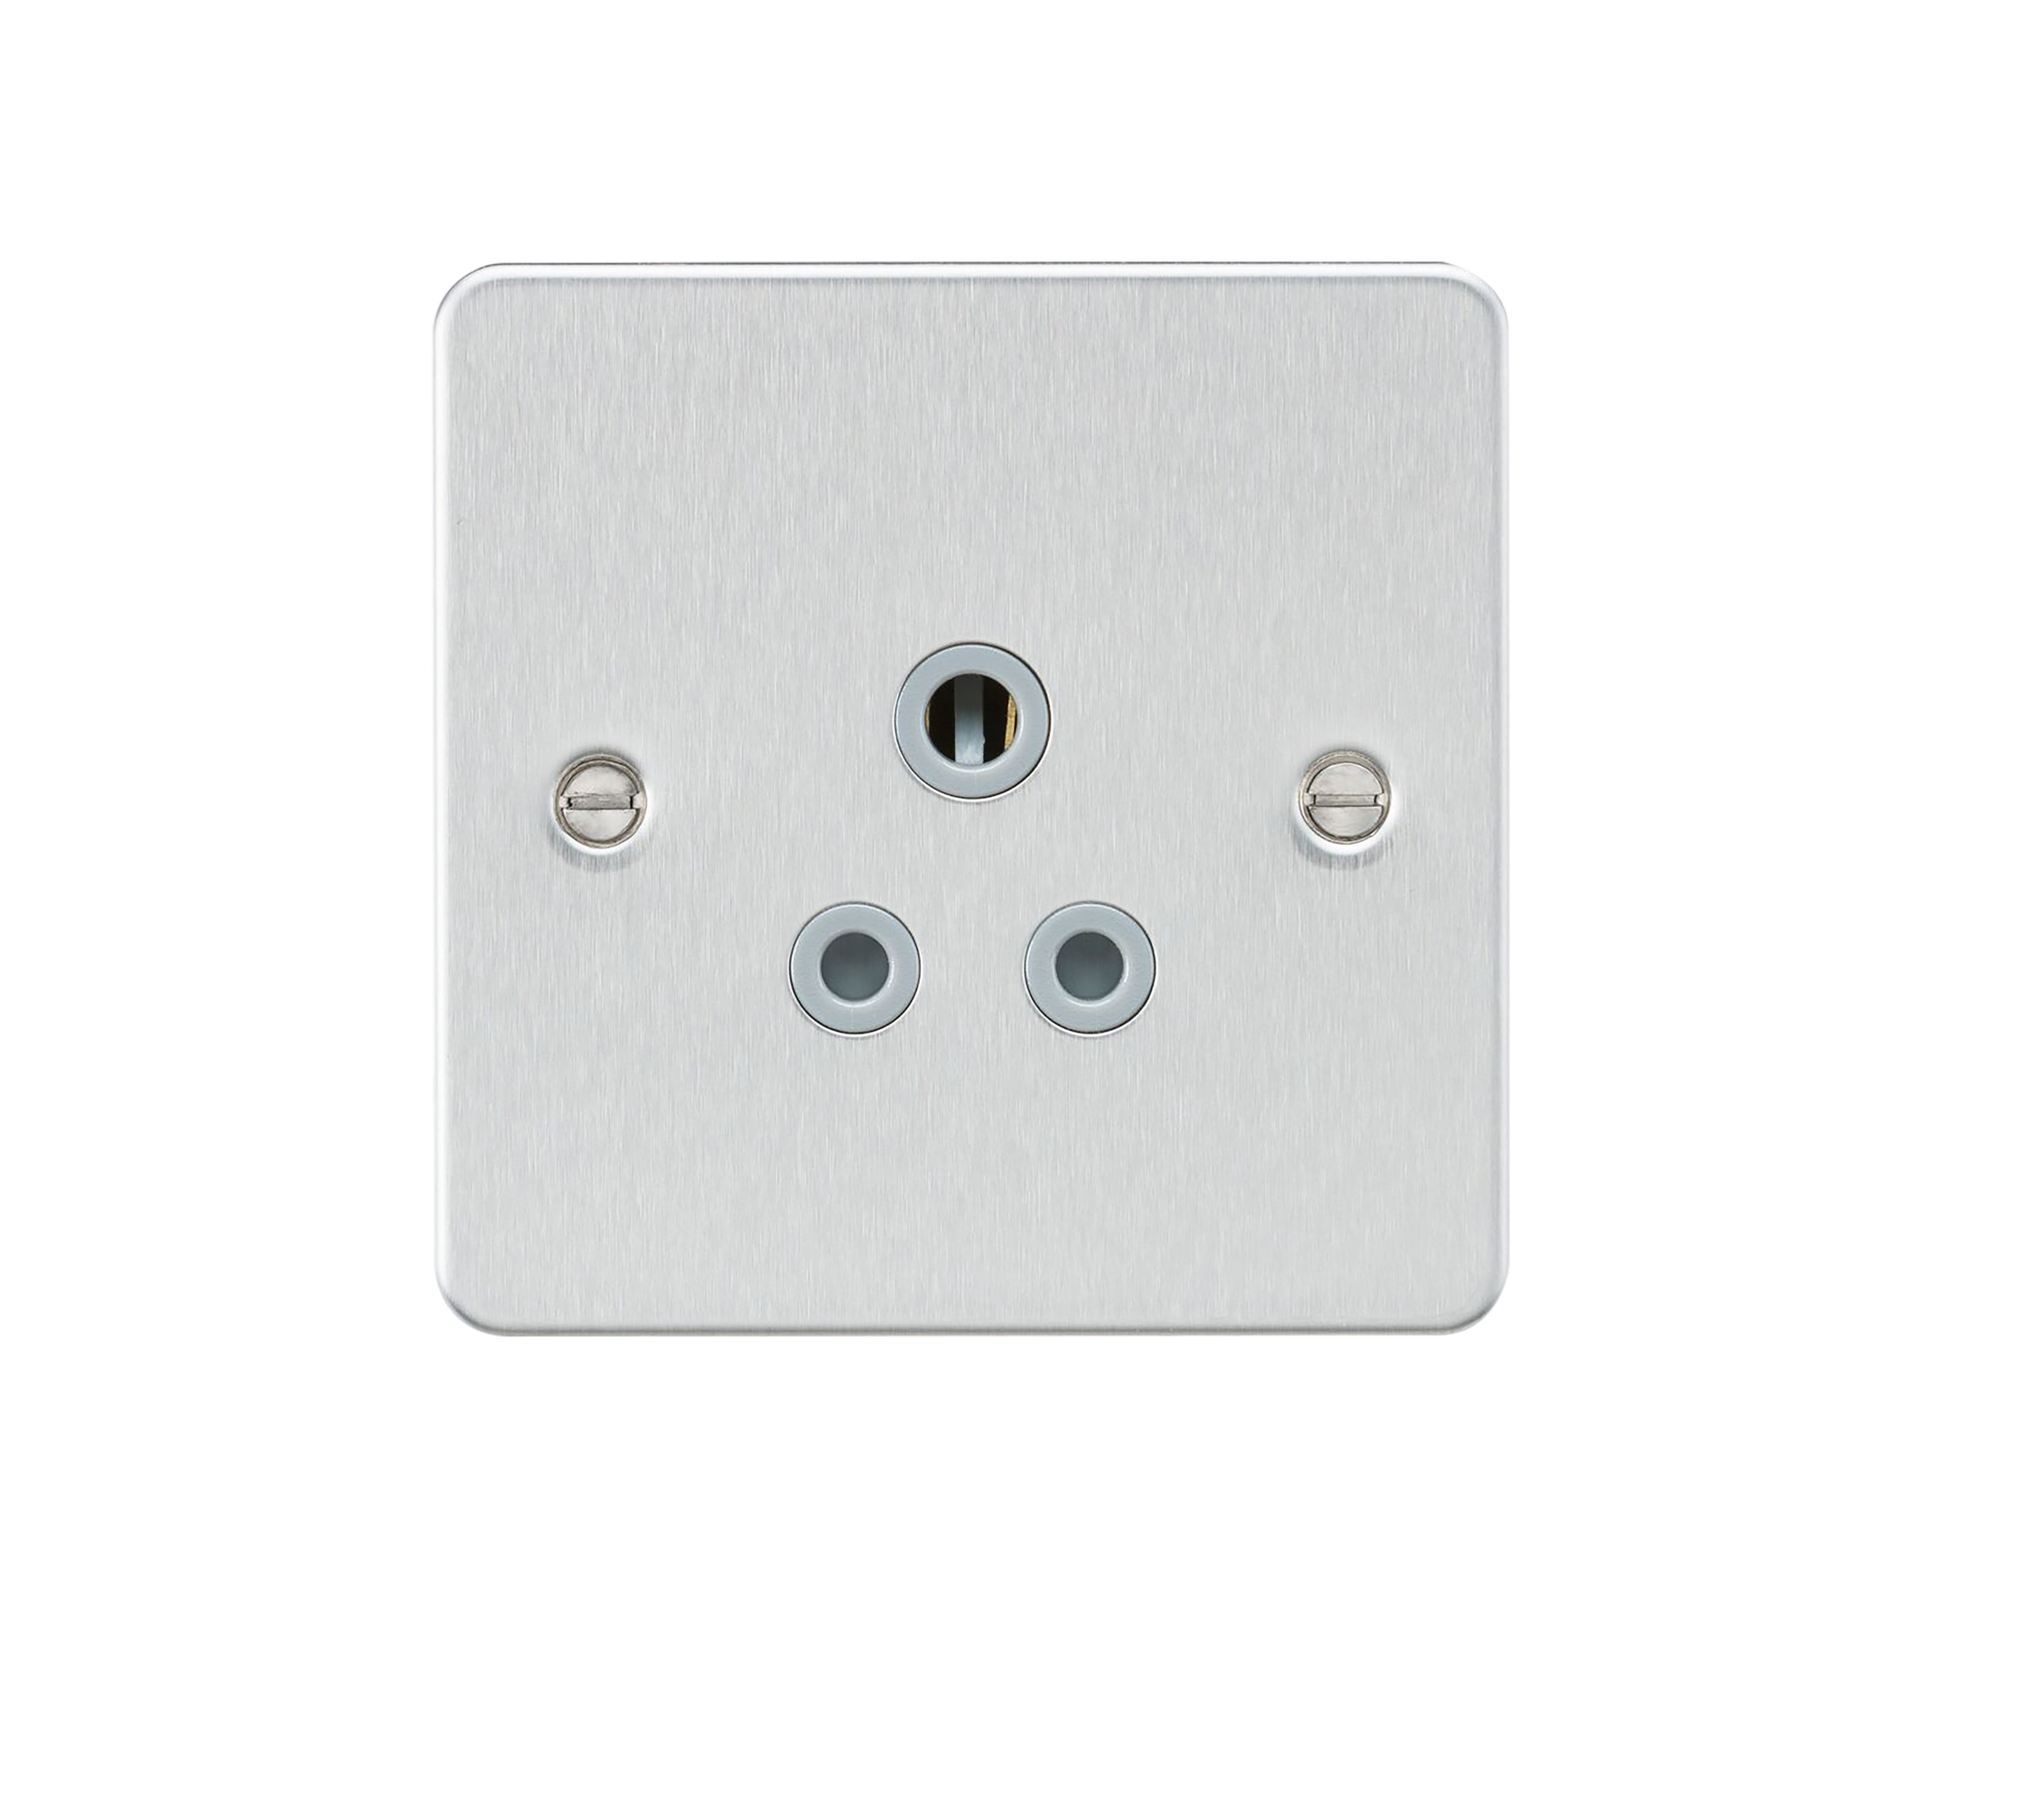 Flat Plate 5A Unswitched Socket - Brushed Chrome With Grey Insert - FP5ABCG 